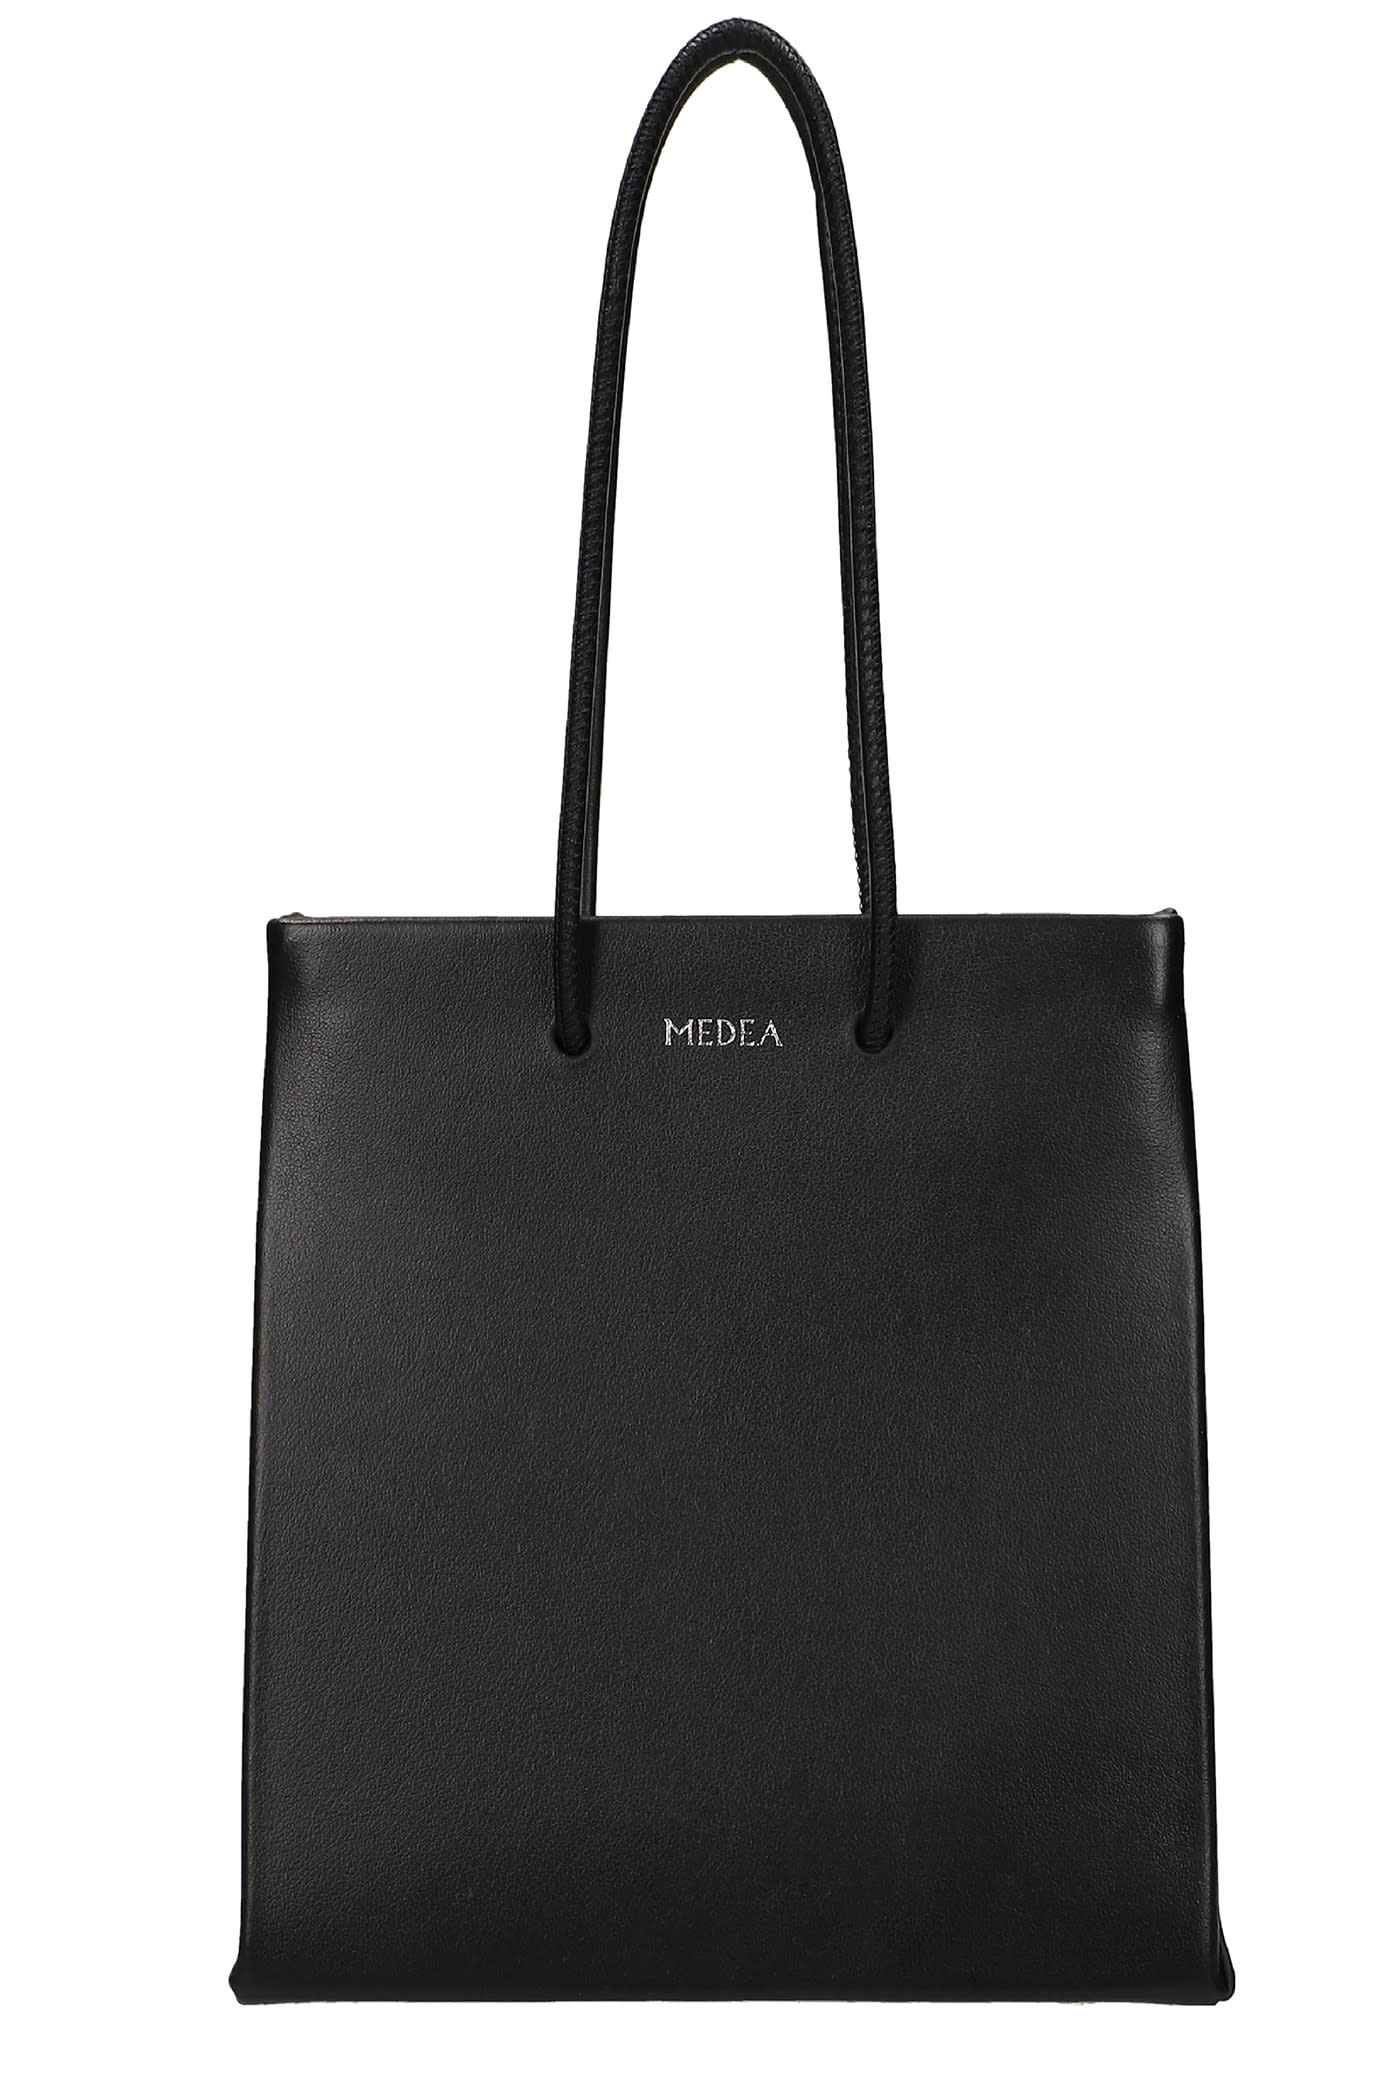 Medea Clutch In Black Leather